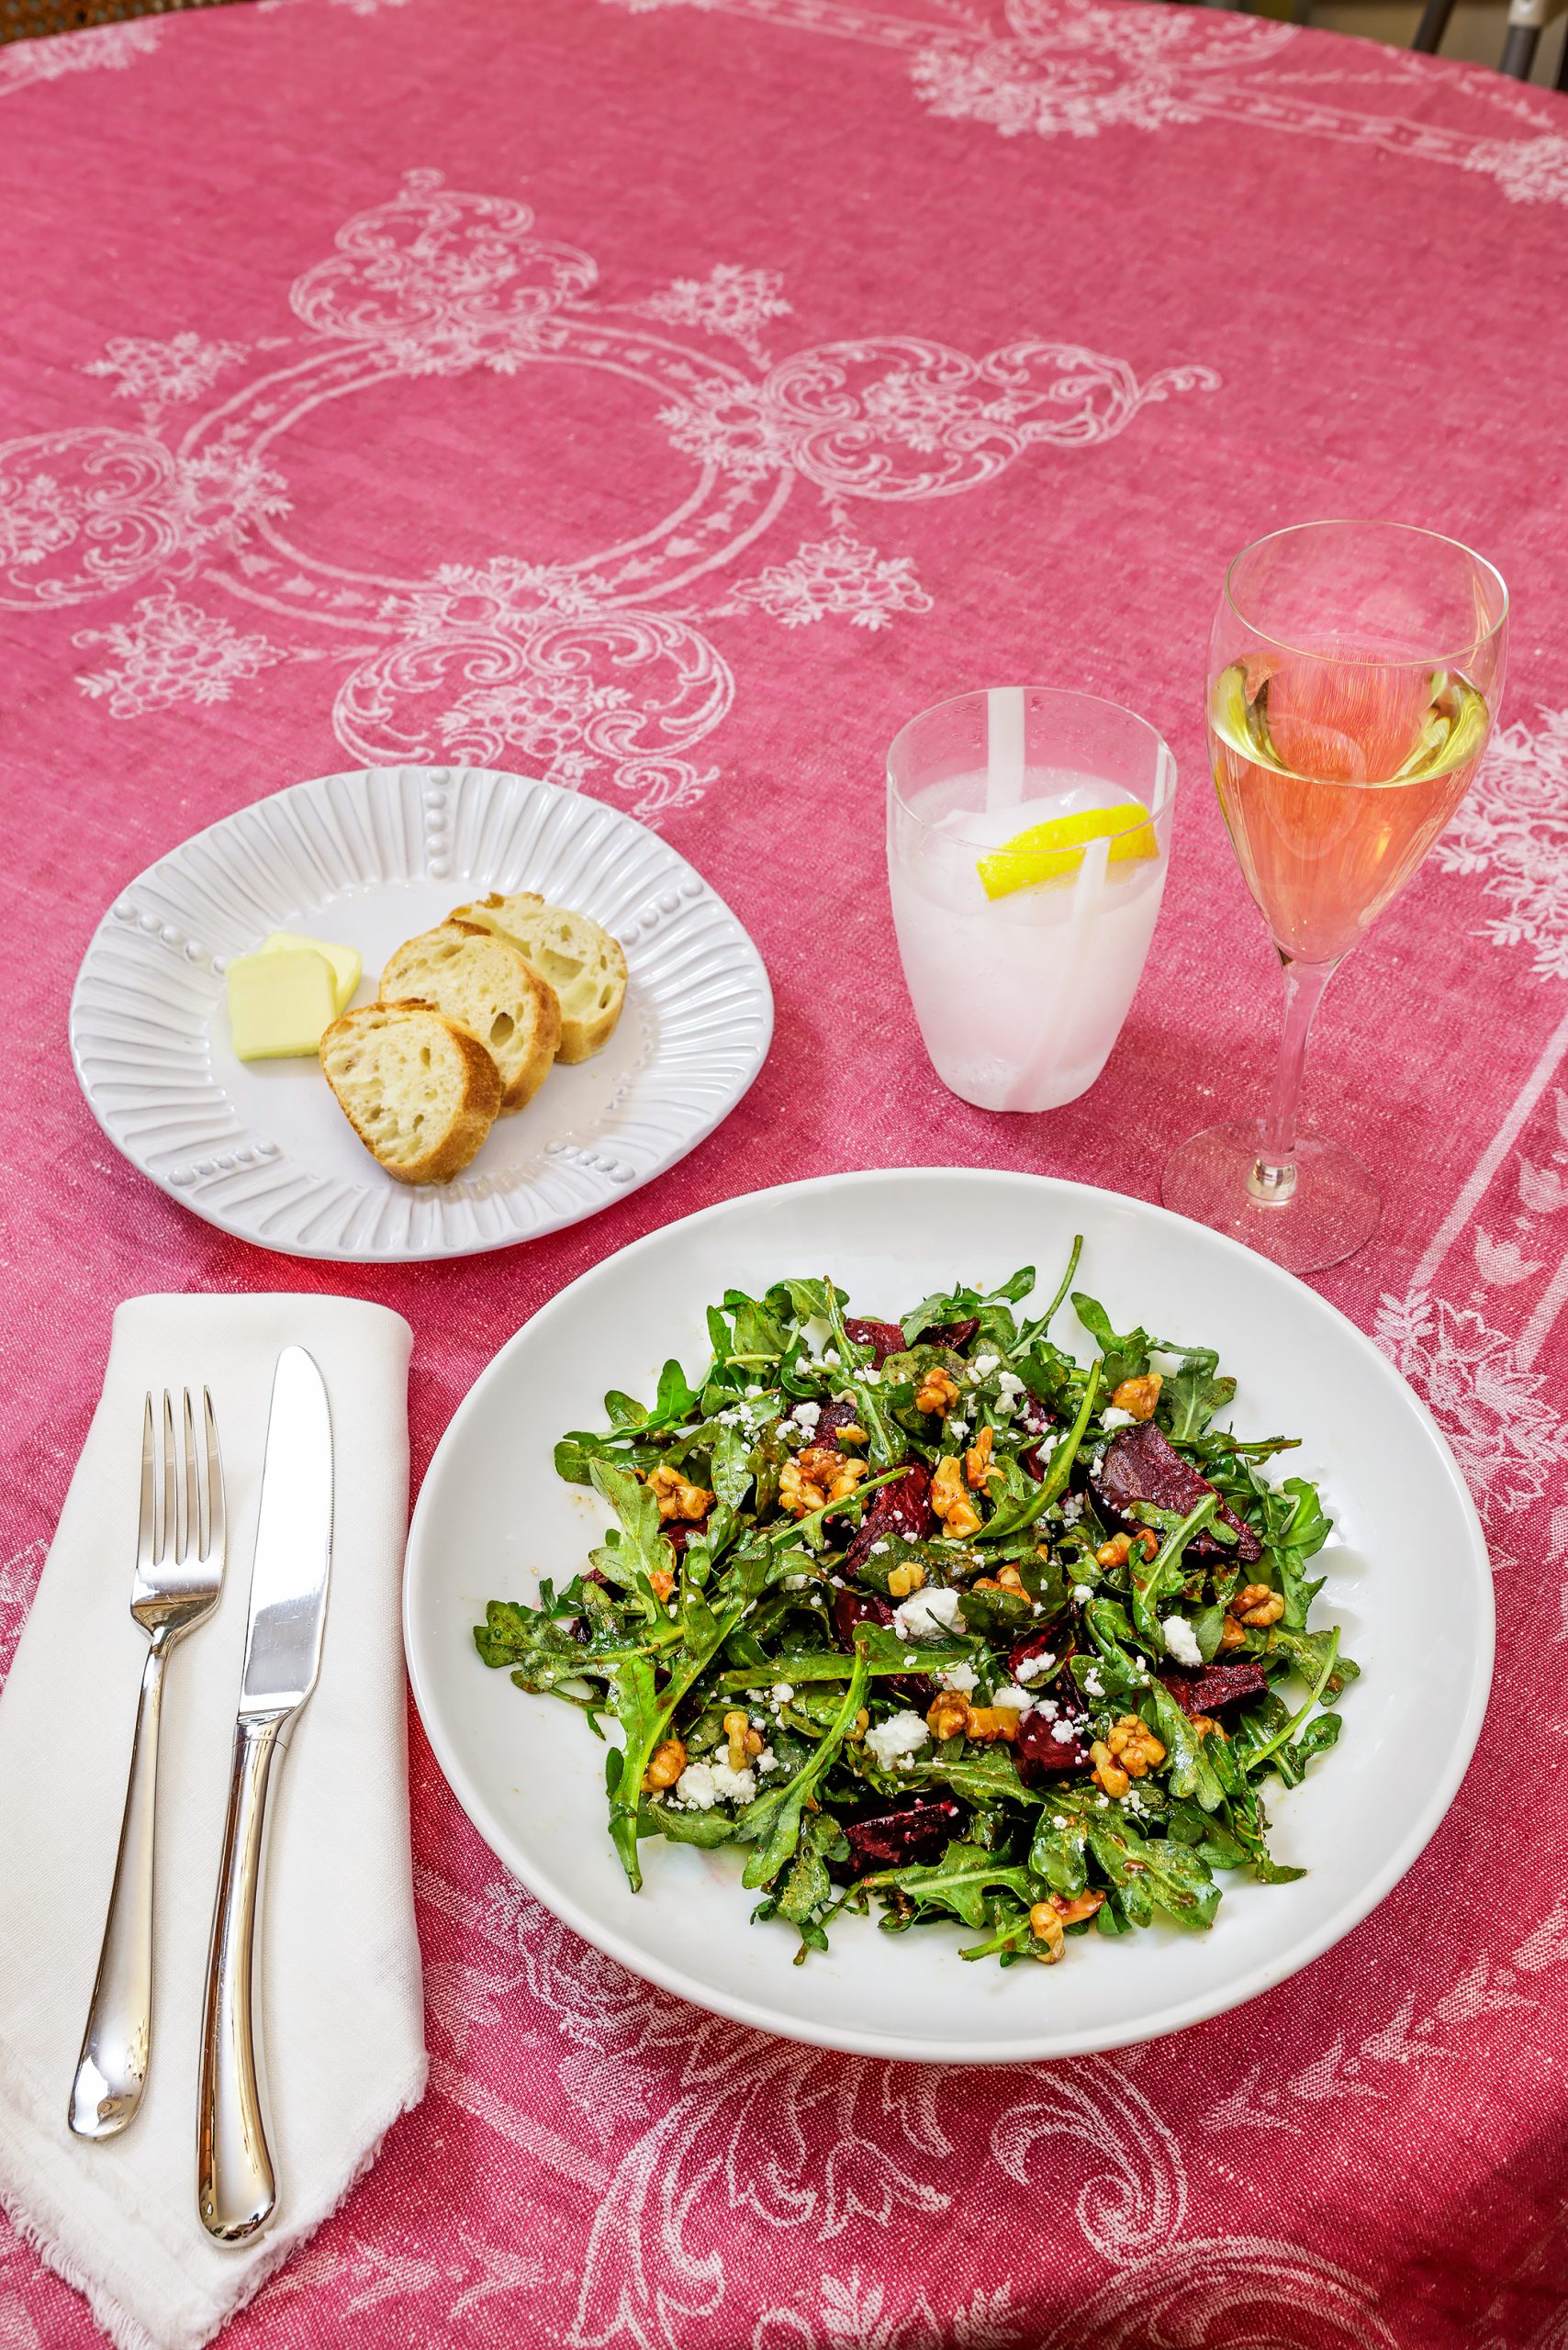 Roasted beets on arugula with crumbled goat cheese is a perfect salad combination. Try dressing it with balsamic vinegar, extra virgin olive oil, Dijon mustard, and garlic powder. Linen Way Melody Tablecloth, Pillivuyt Shallow round bowl, Vietri Incanto Stripe American Dinner Plate, Vietri Incanto Stripe Salad Plate, Vietri Stripe Tumbler, Settimocielo Place Setting, courtesy of The Gourmet Shop.